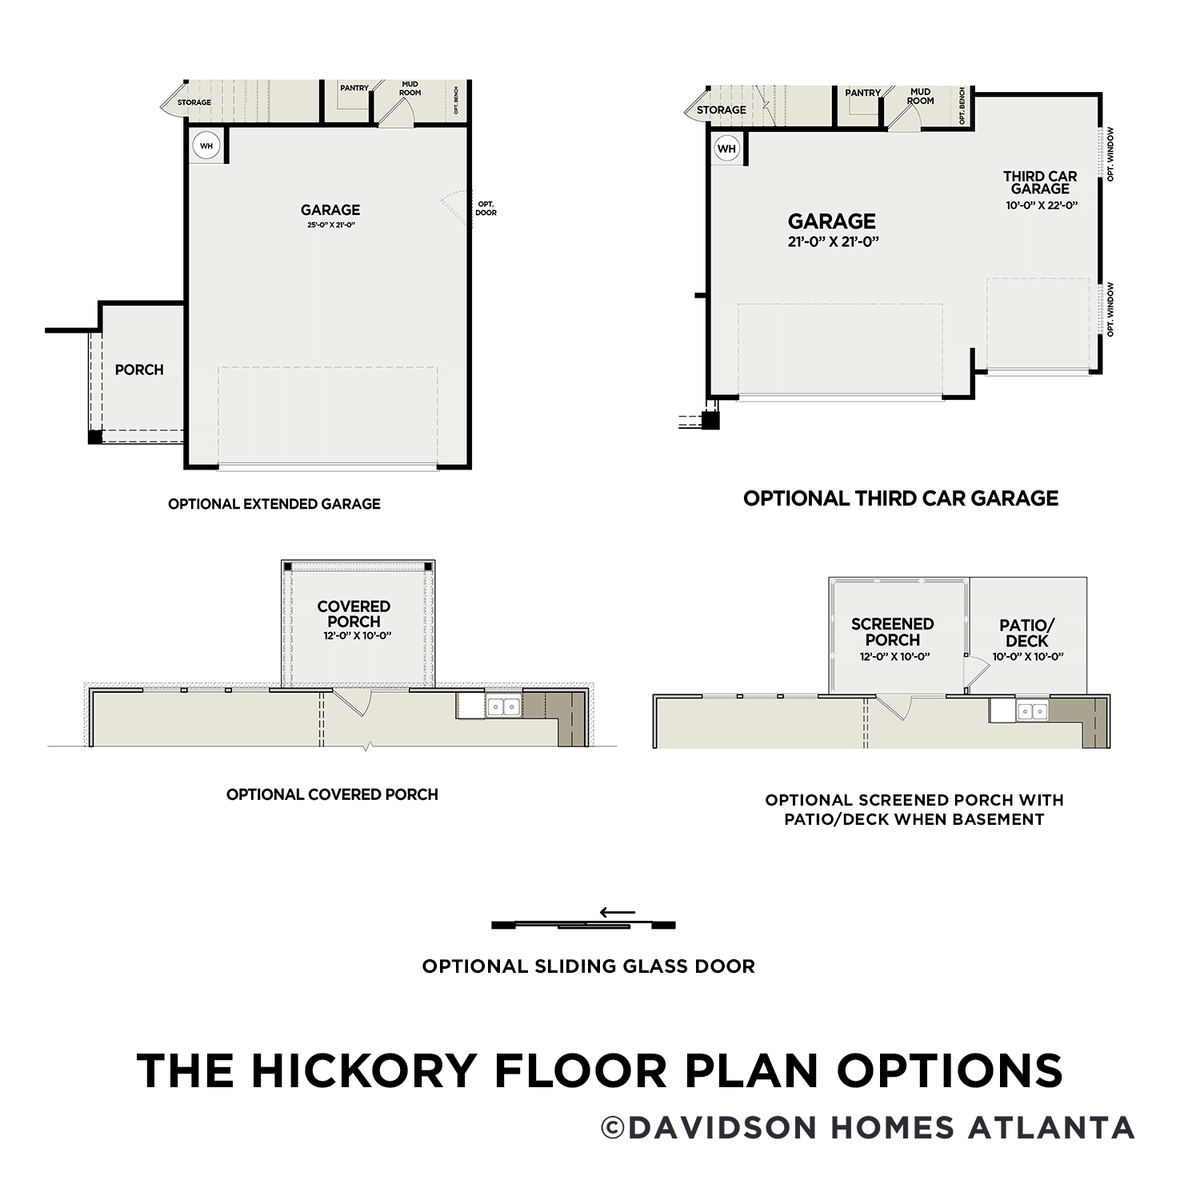 3 - The Hickory A floor plan layout for 88 Van Winkle Street  in Davidson Homes' Wellers Knoll community.